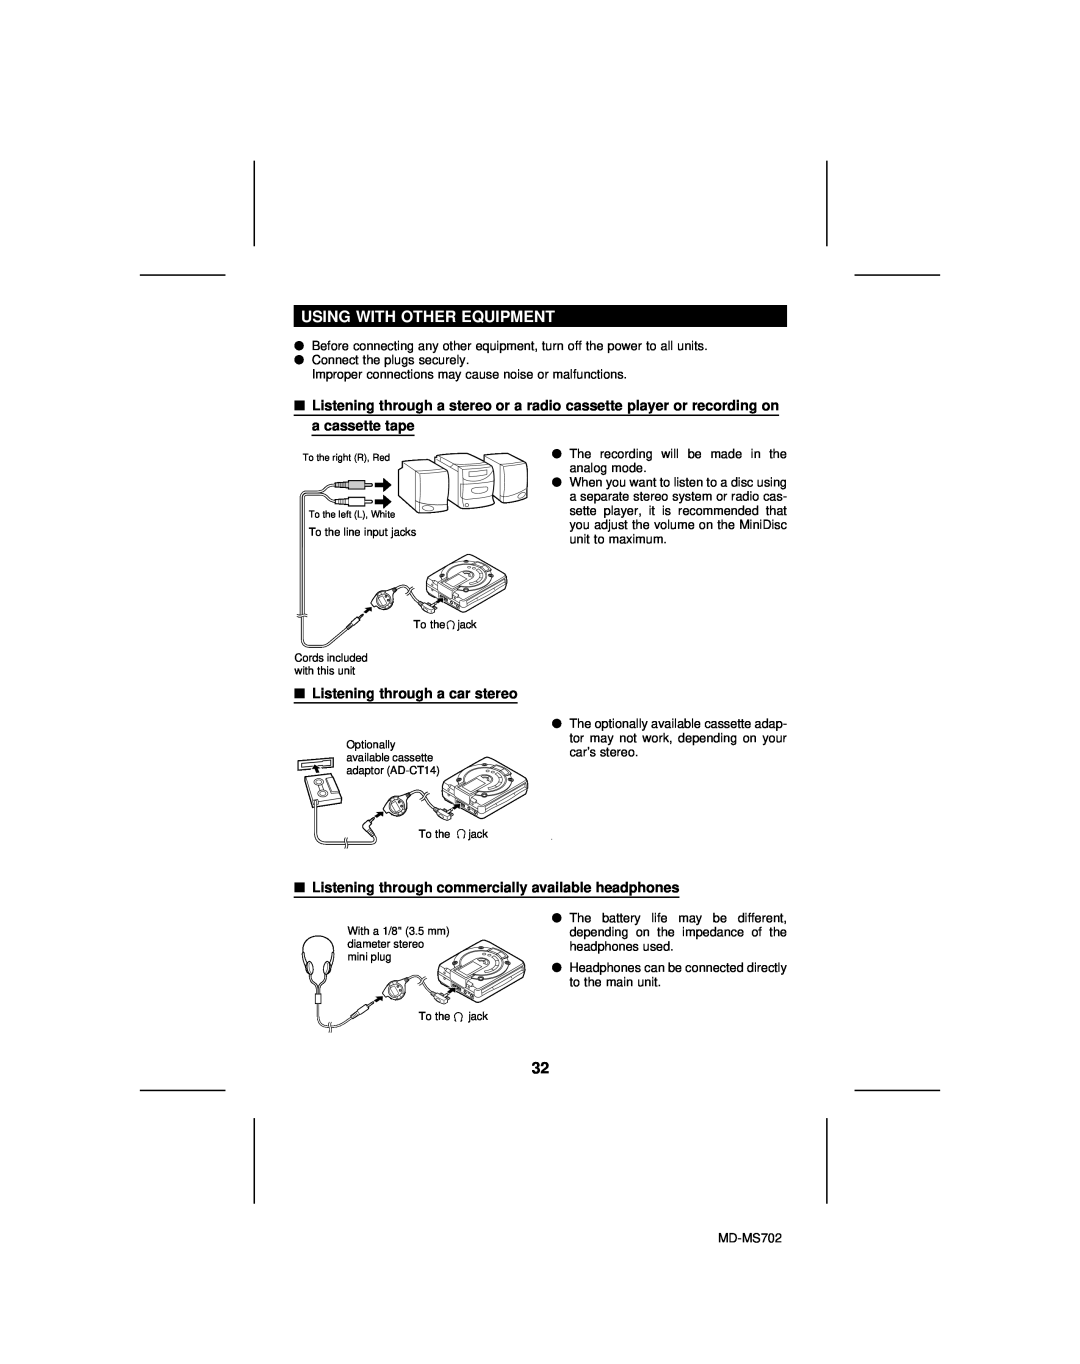 Sharp MD-MS702, MD-R2 operation manual Using With Other Equipment, Listening through a car stereo 